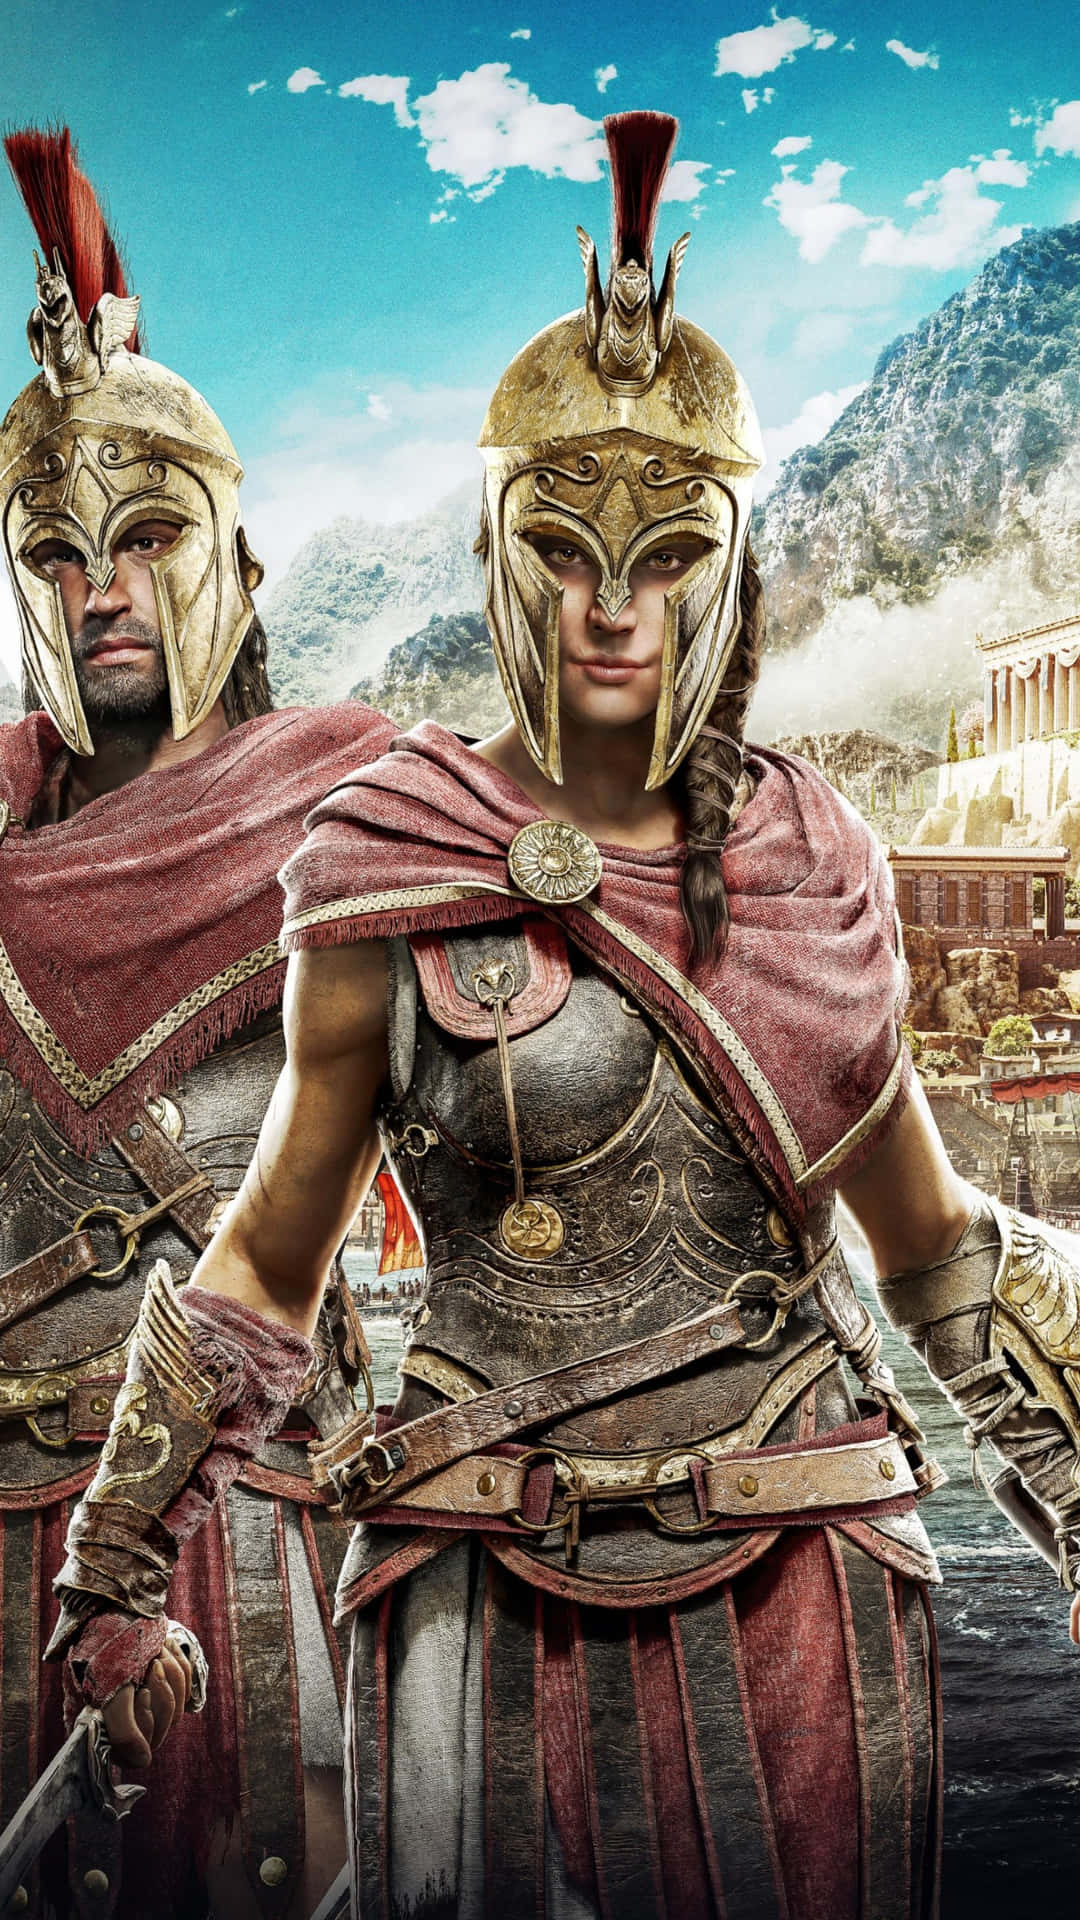 Uncover the Lost Legacies of Ancient Greece on Android with Assassin's Creed Odyssey